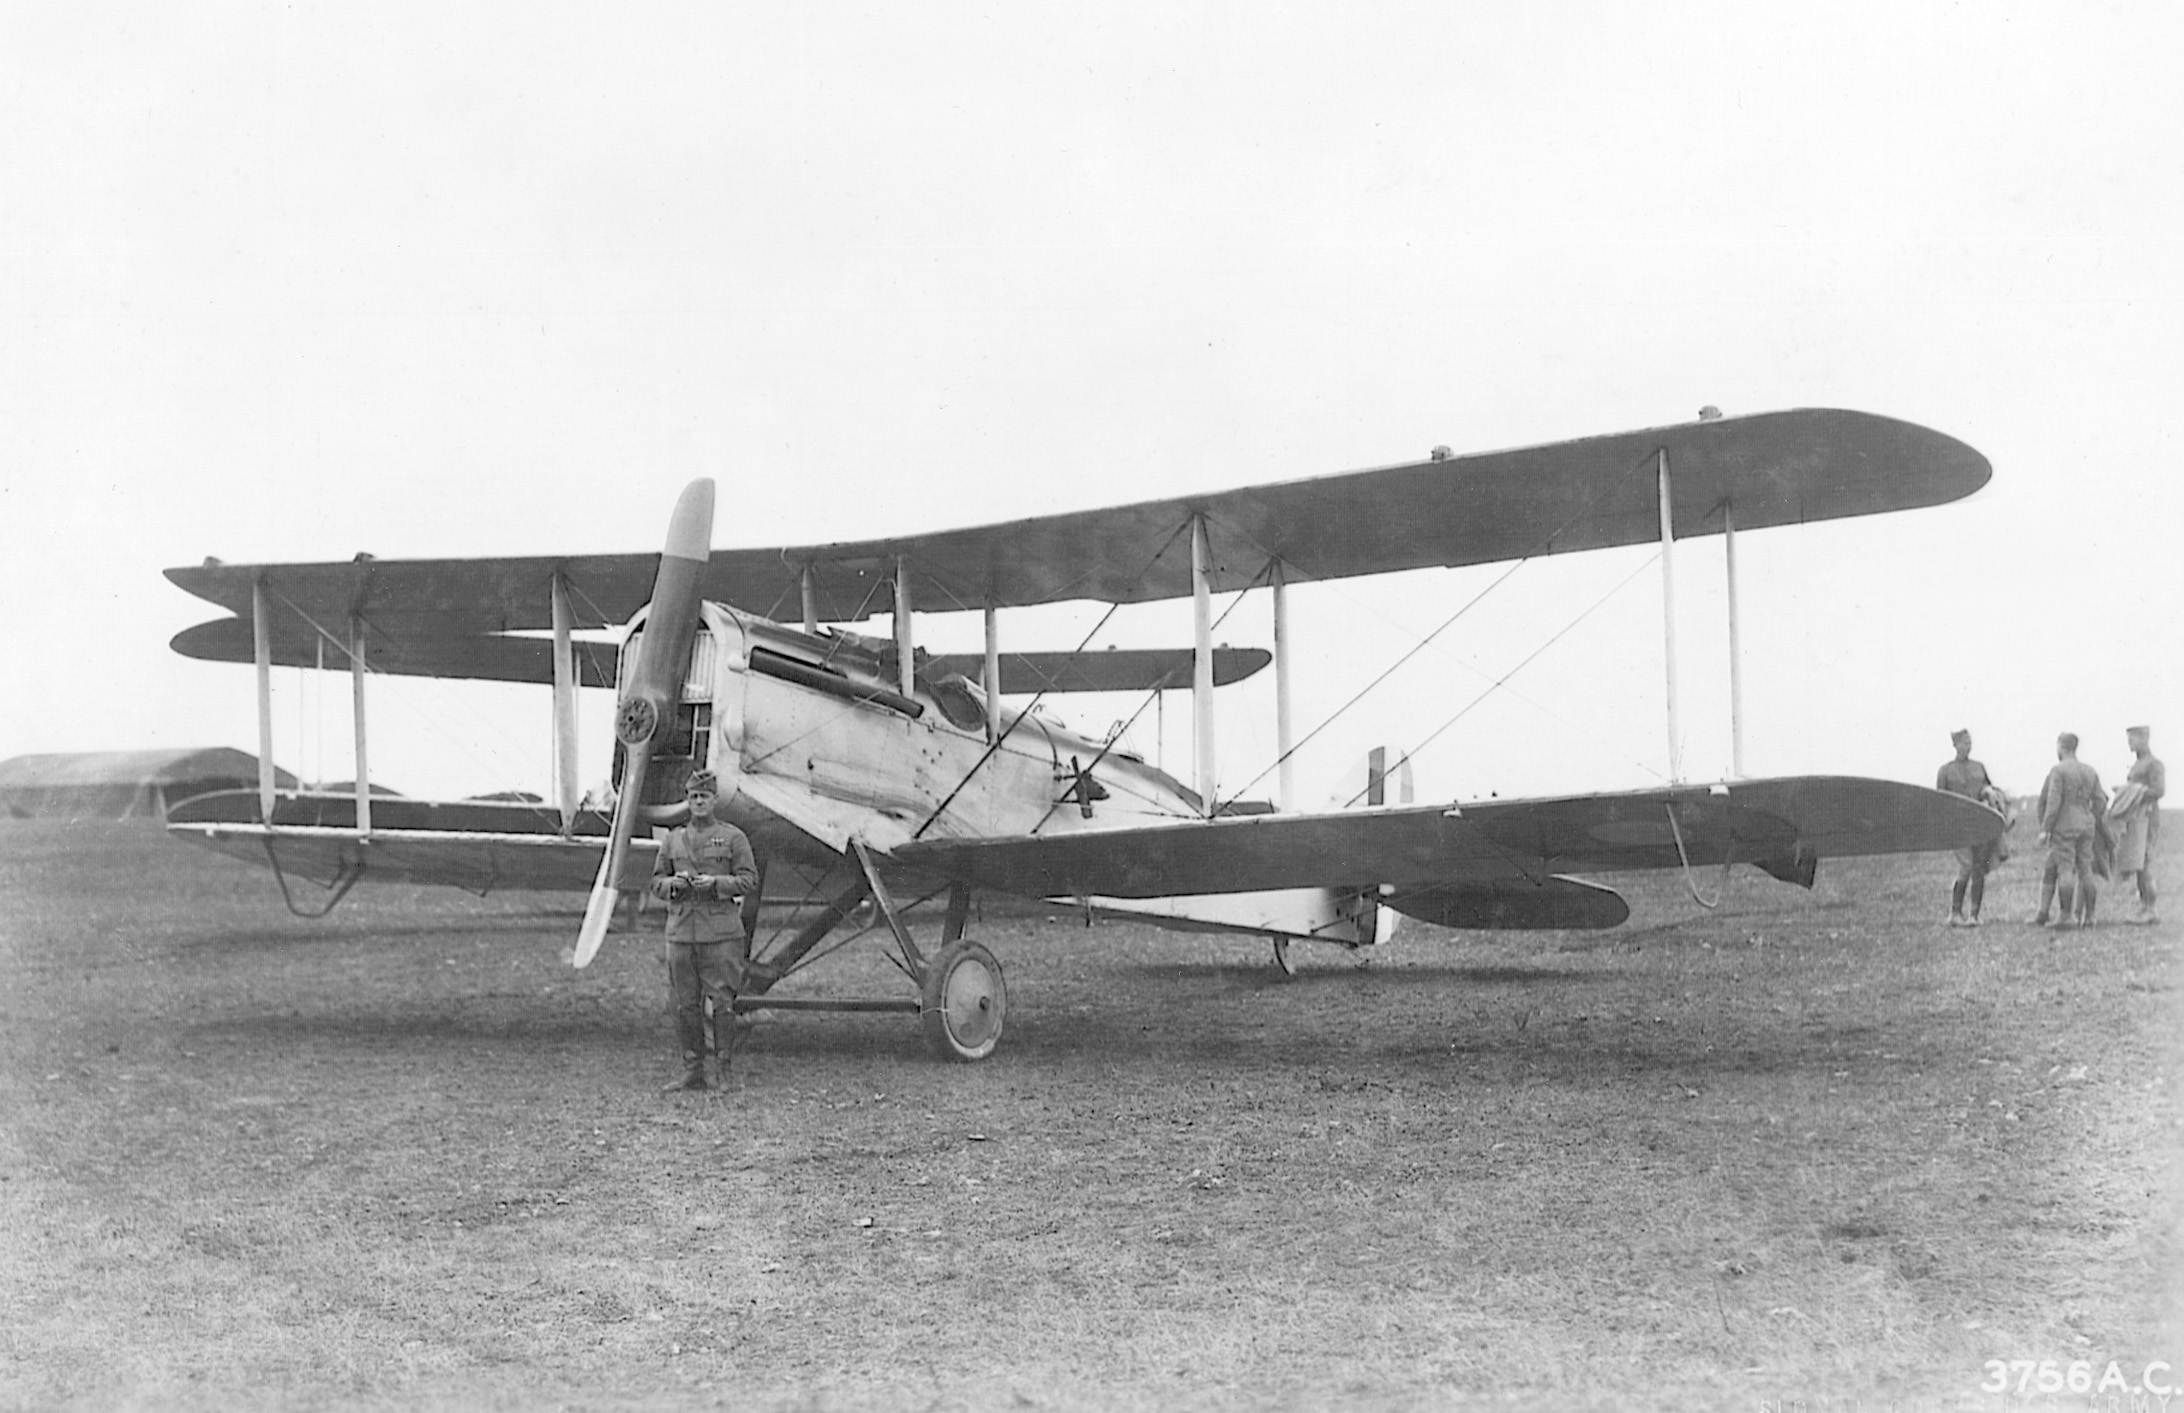 Foulois in front of a “Liberty Plane” at Colombey-les-Belles, France, in July 1918. Foulois was commander of the Air Service of the U.S. AEF. He was awarded the Distinguished Service Medal and the French Commander of the Legion of Honor. 